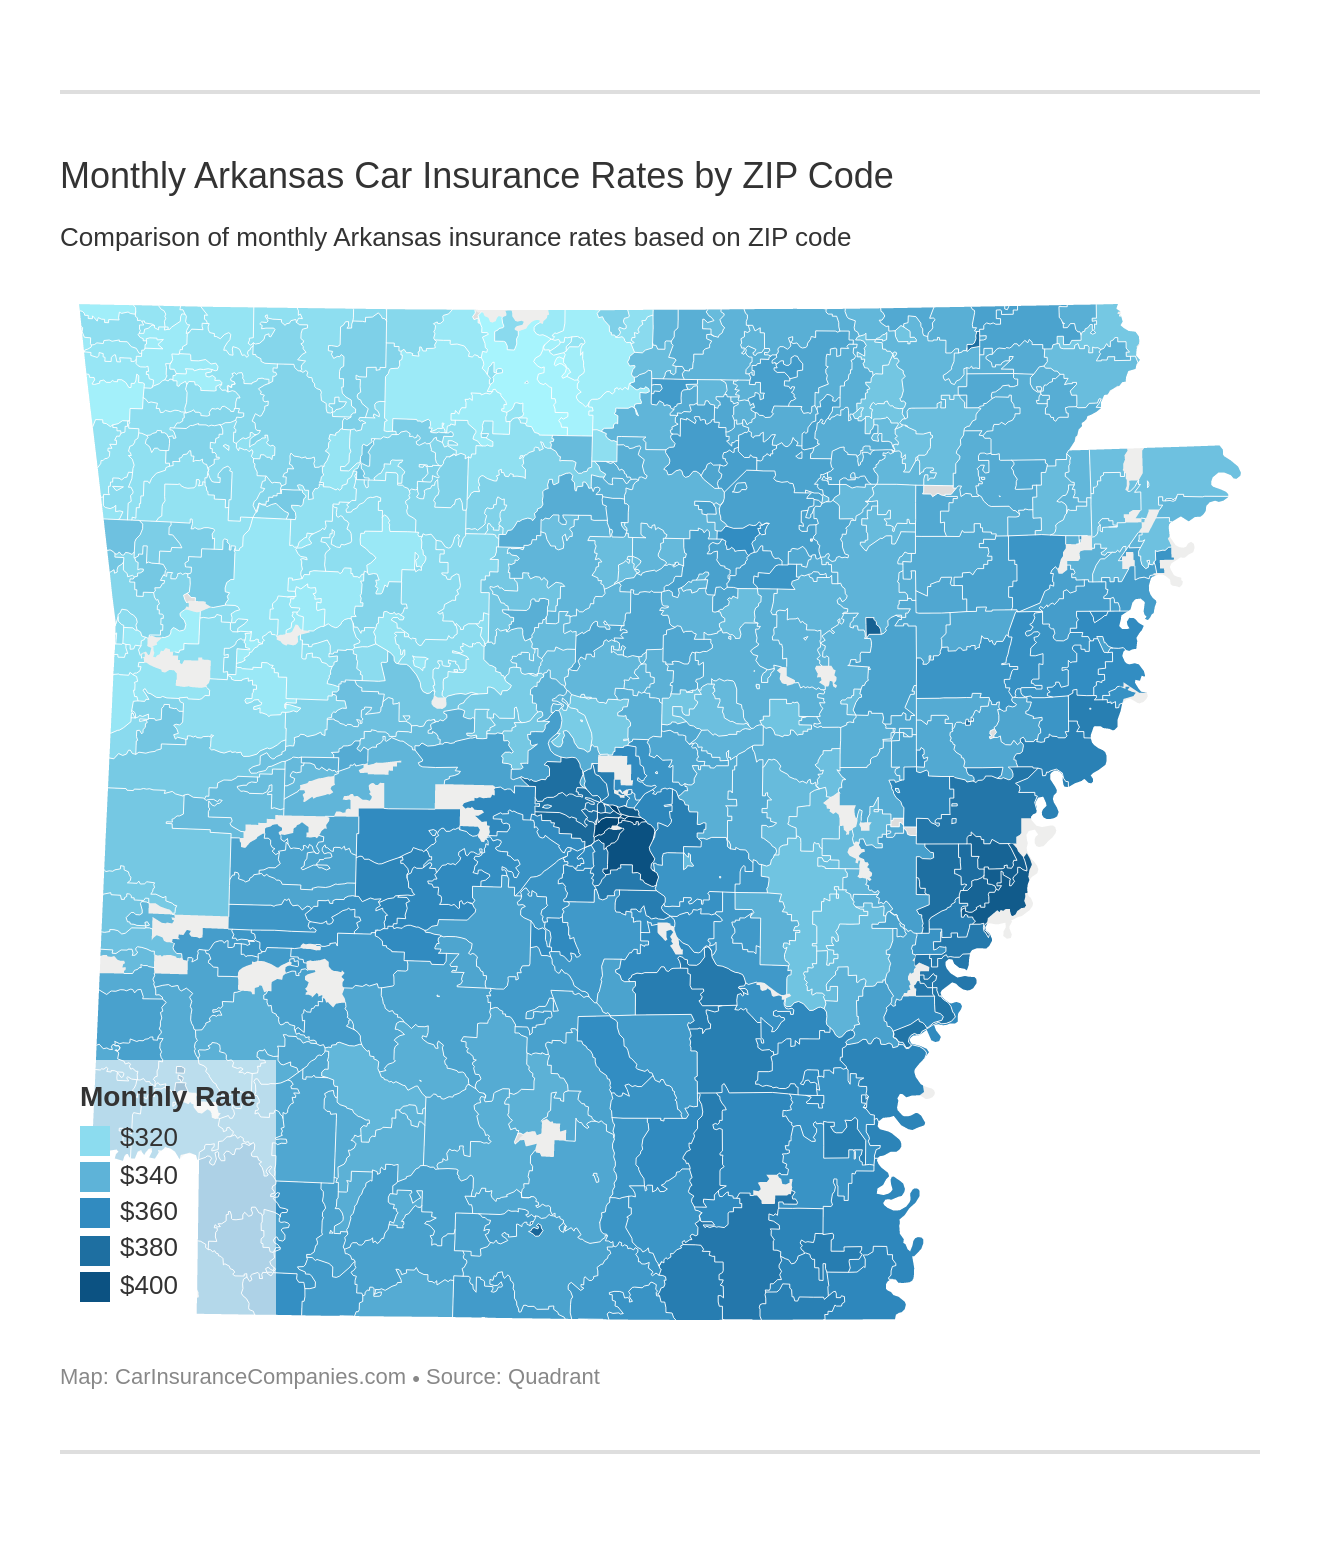 Monthly Arkansas Car Insurance Rates by ZIP Code